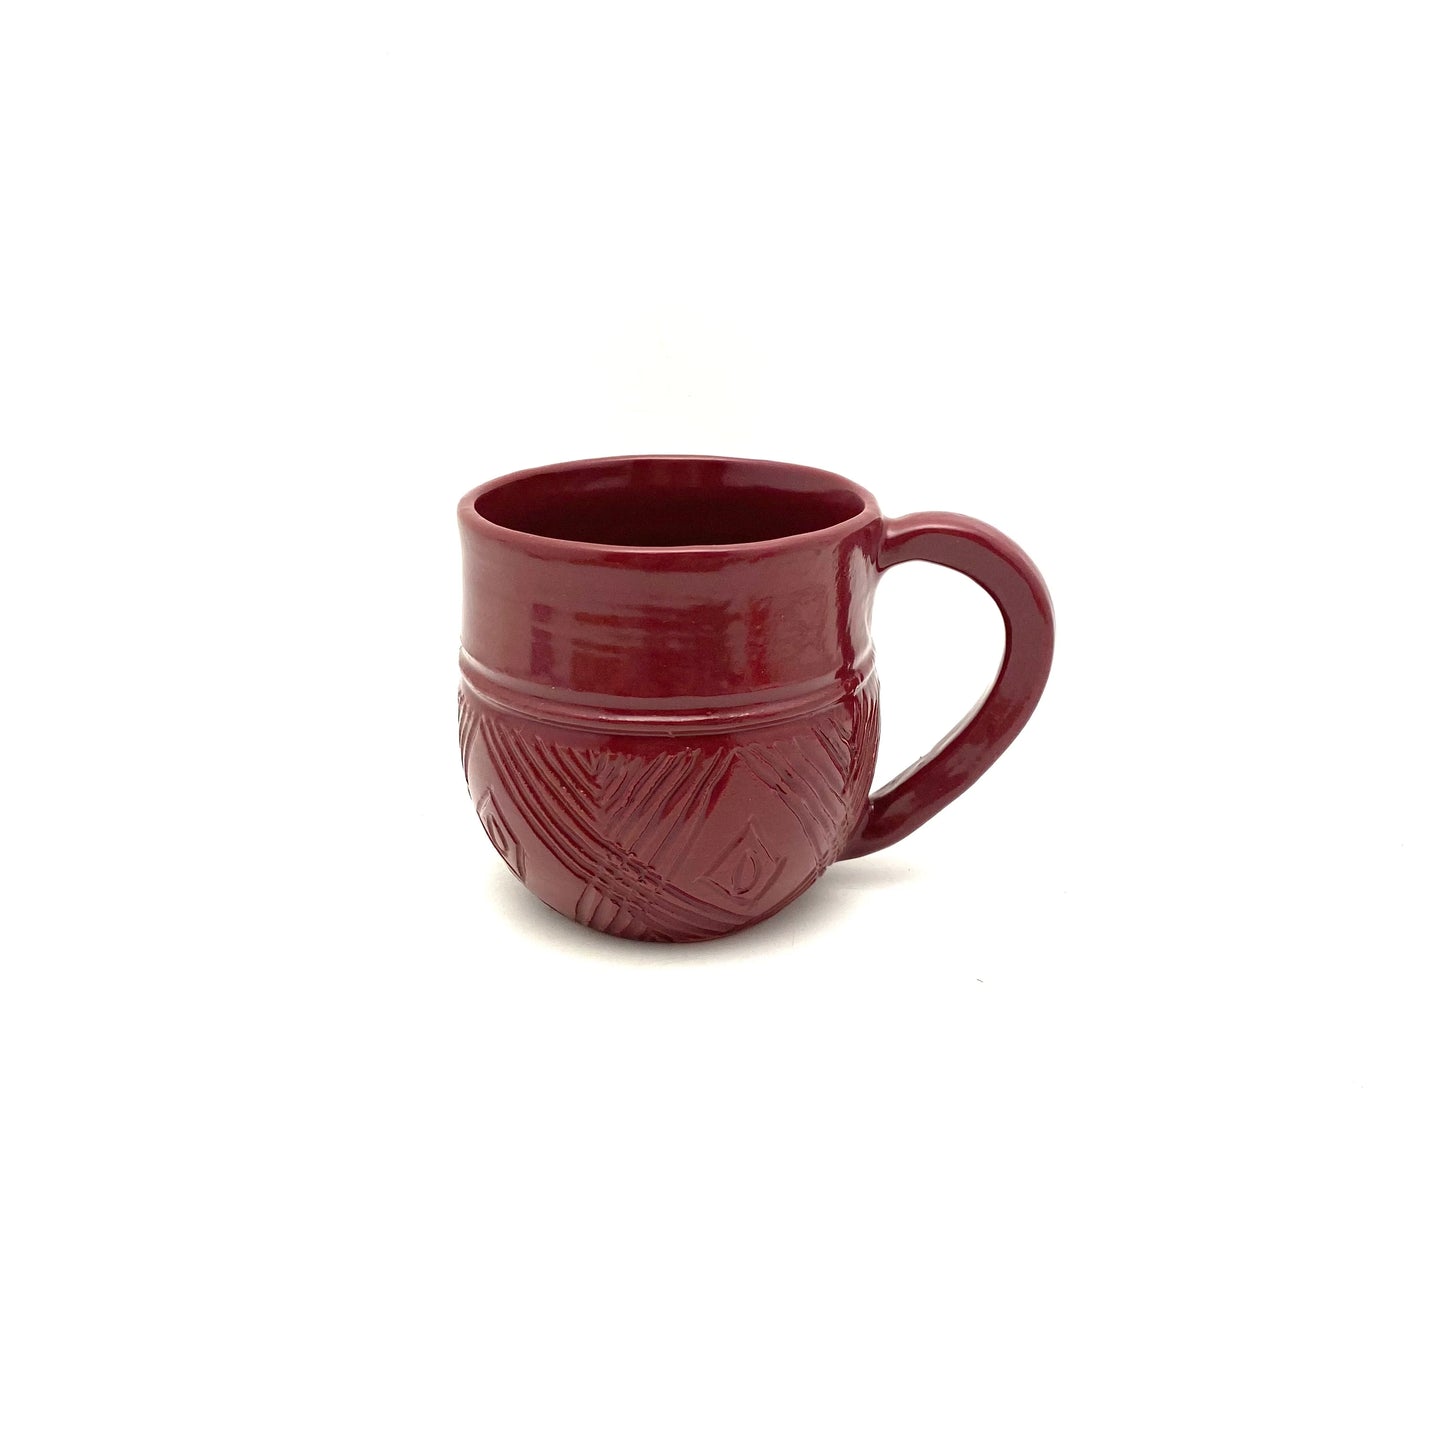 Short Taino Mugs. Perfect for teatime play, a spot of tea, or a shot of espresso with cream! These ceramic mugs are kiln fired and finished with food-safe, lead-free glaze. Each mug holds about 6 ounces. 